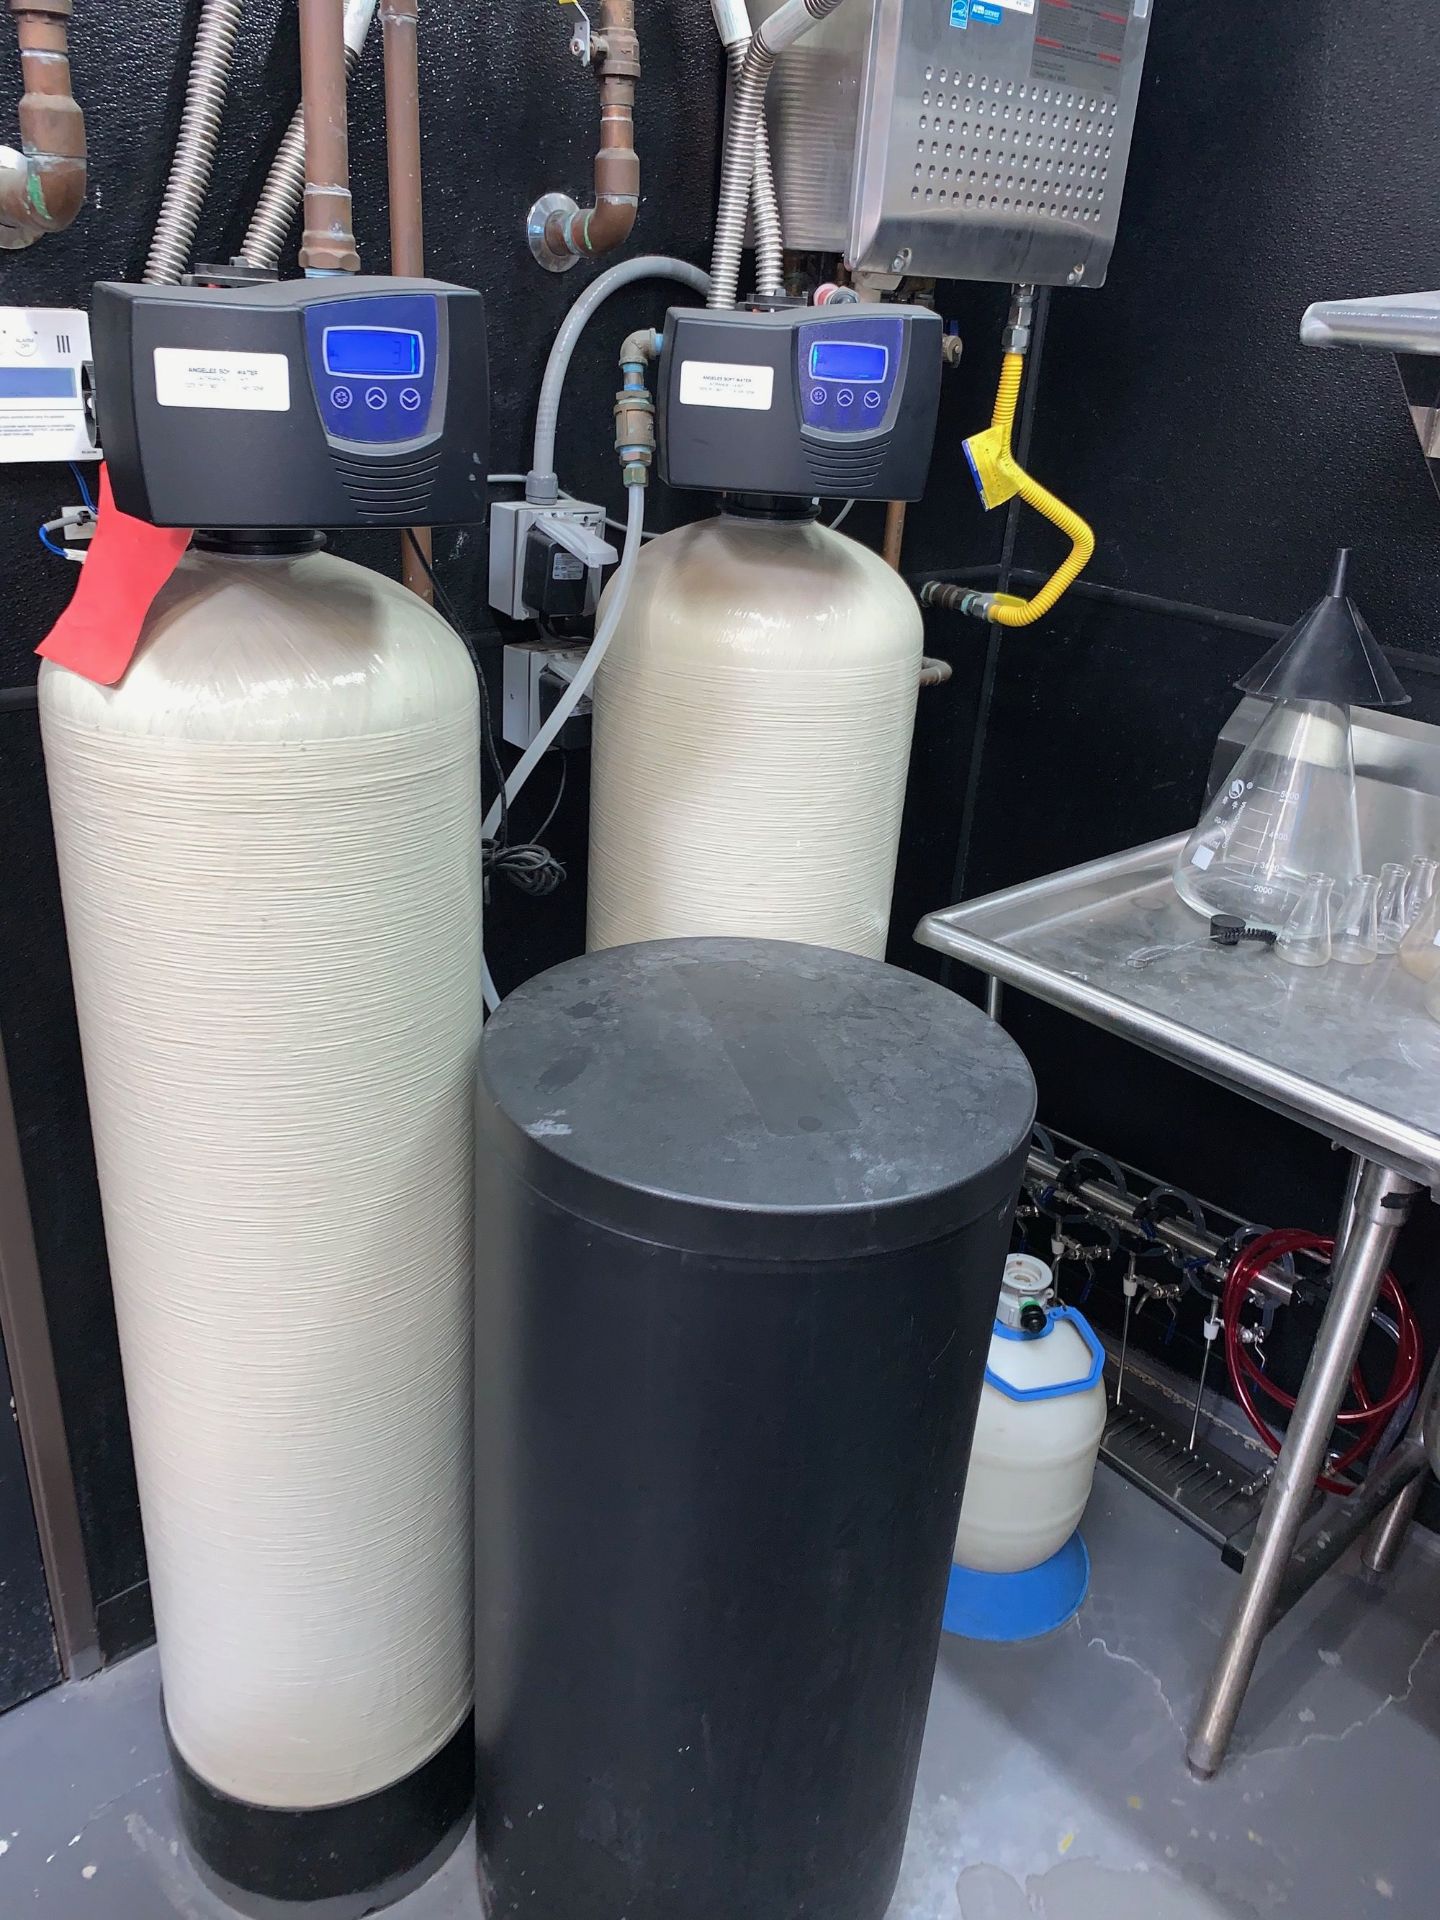 Carbon Water Filters and Water Softner System (3-Vessels) | Subj to Bulk | Rig Fee: $200